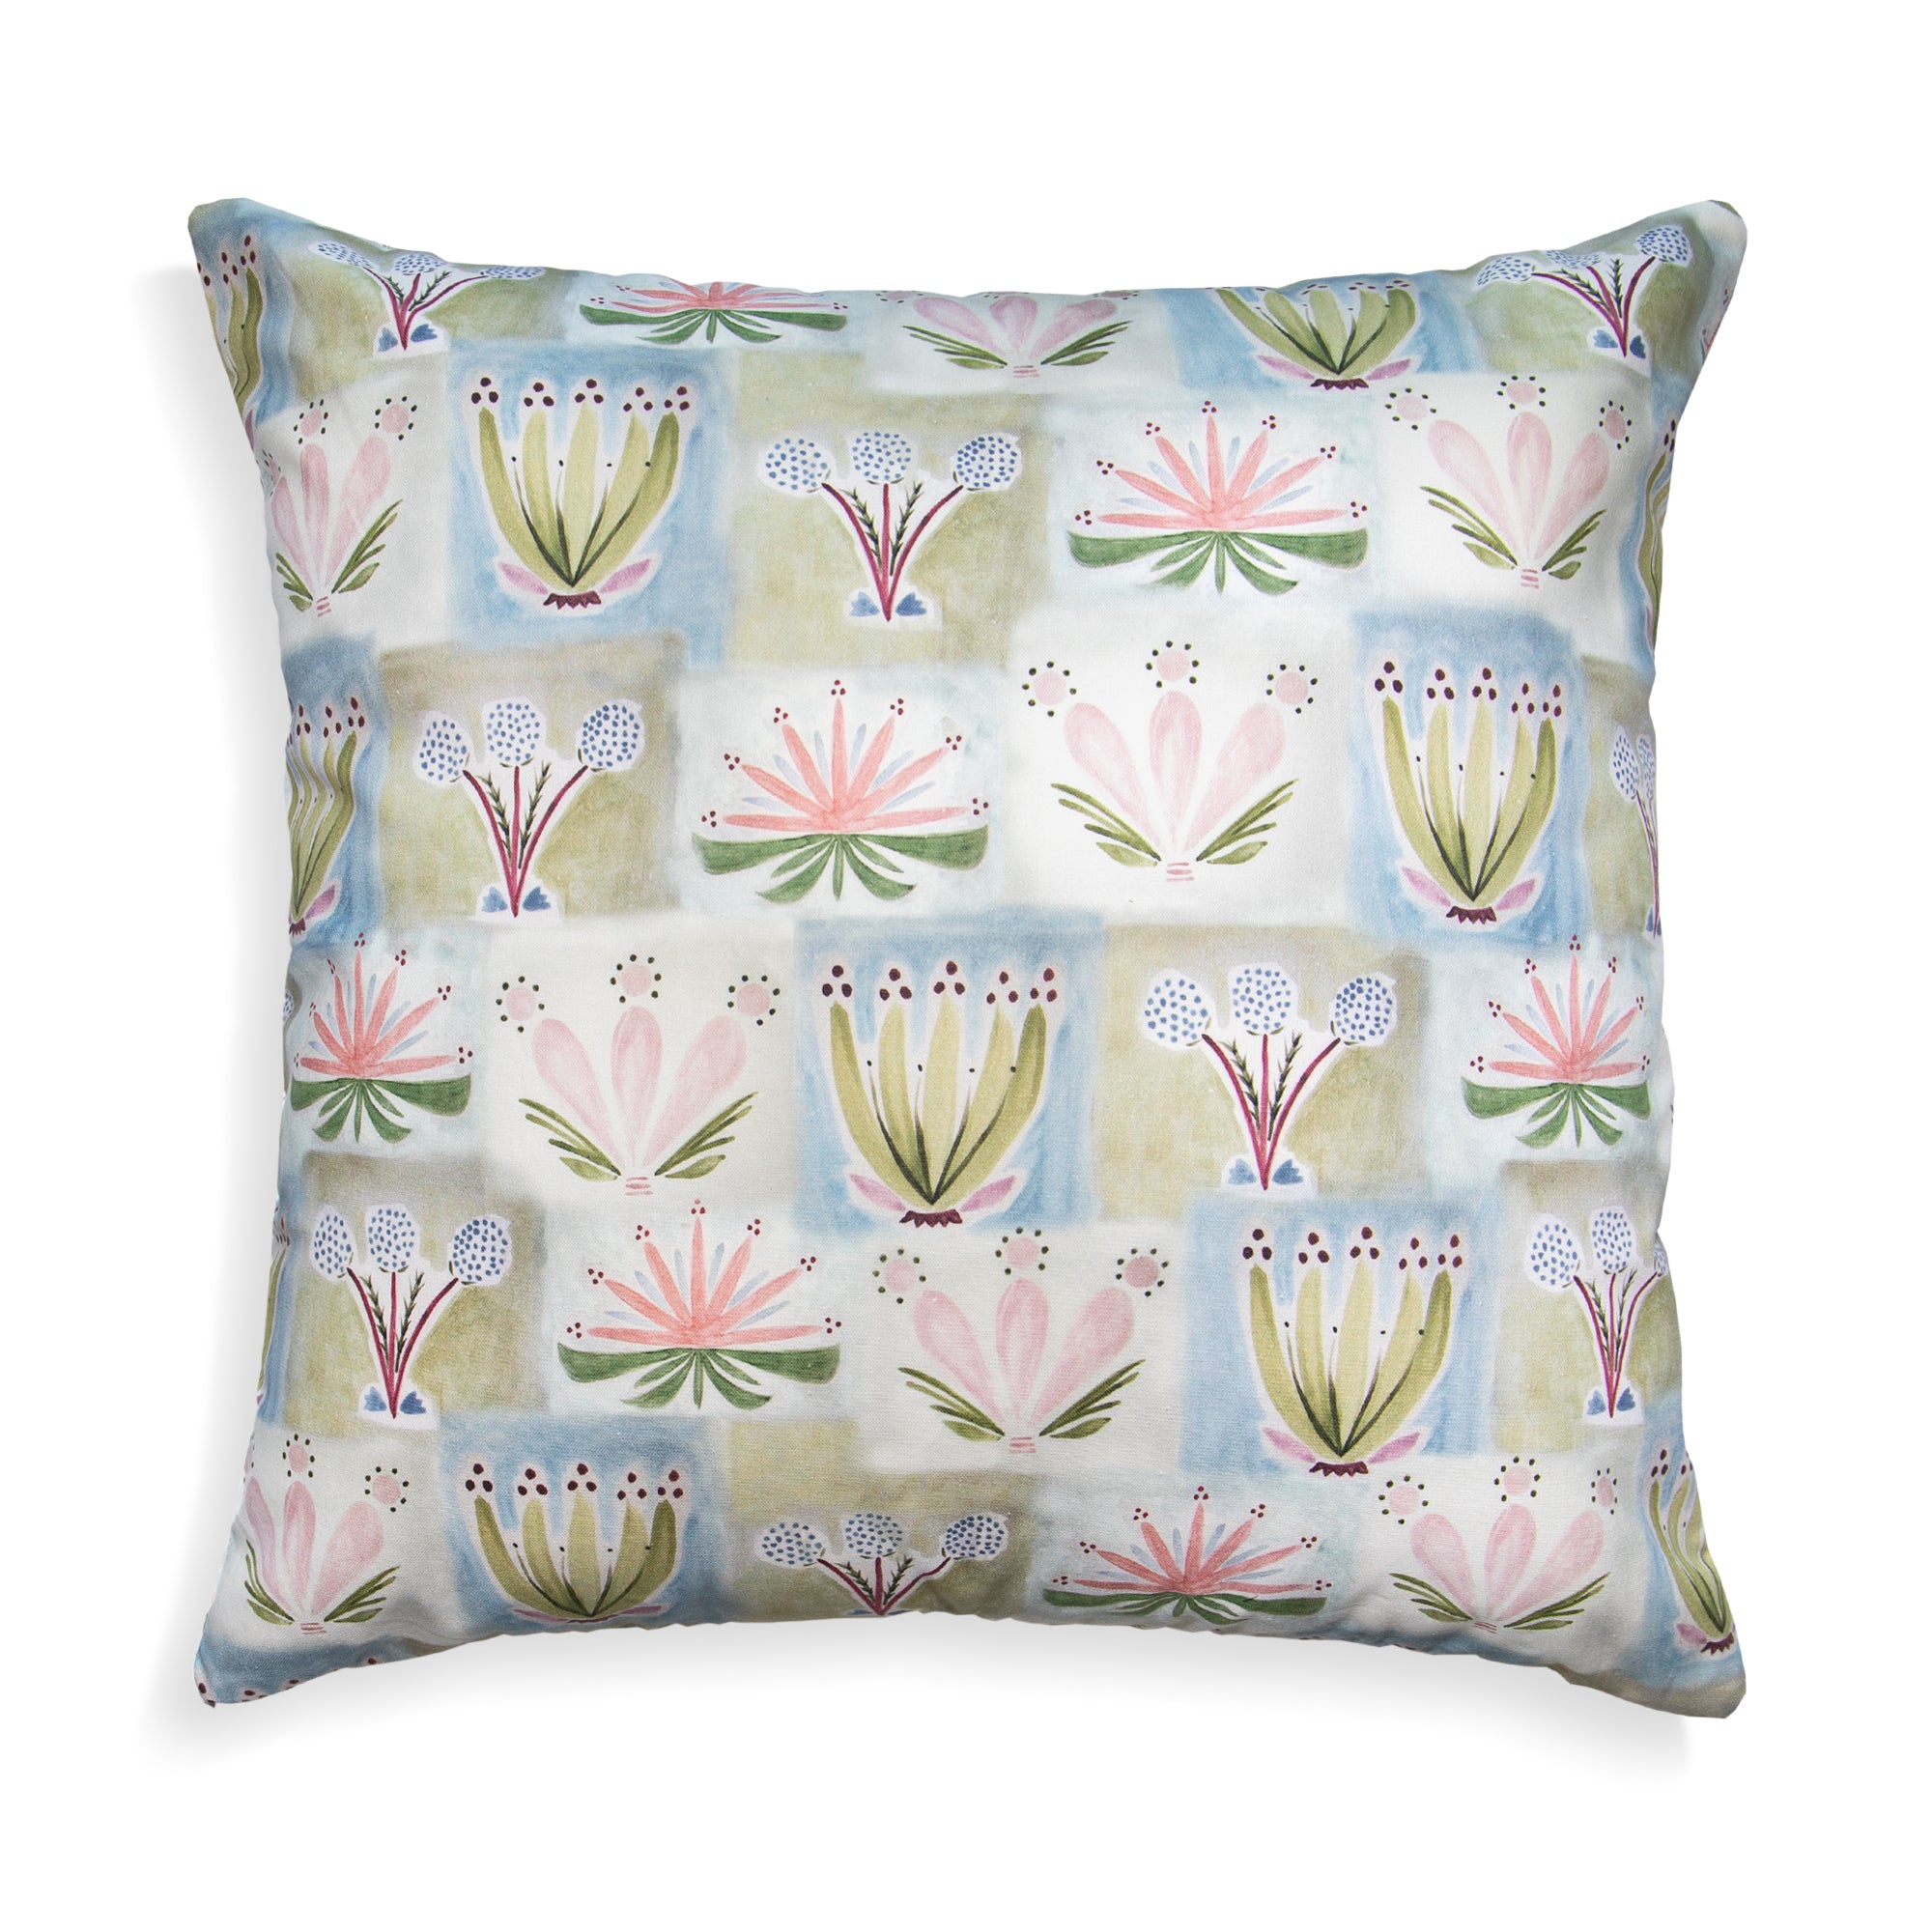 Hand-painted Floral Printed Pillow